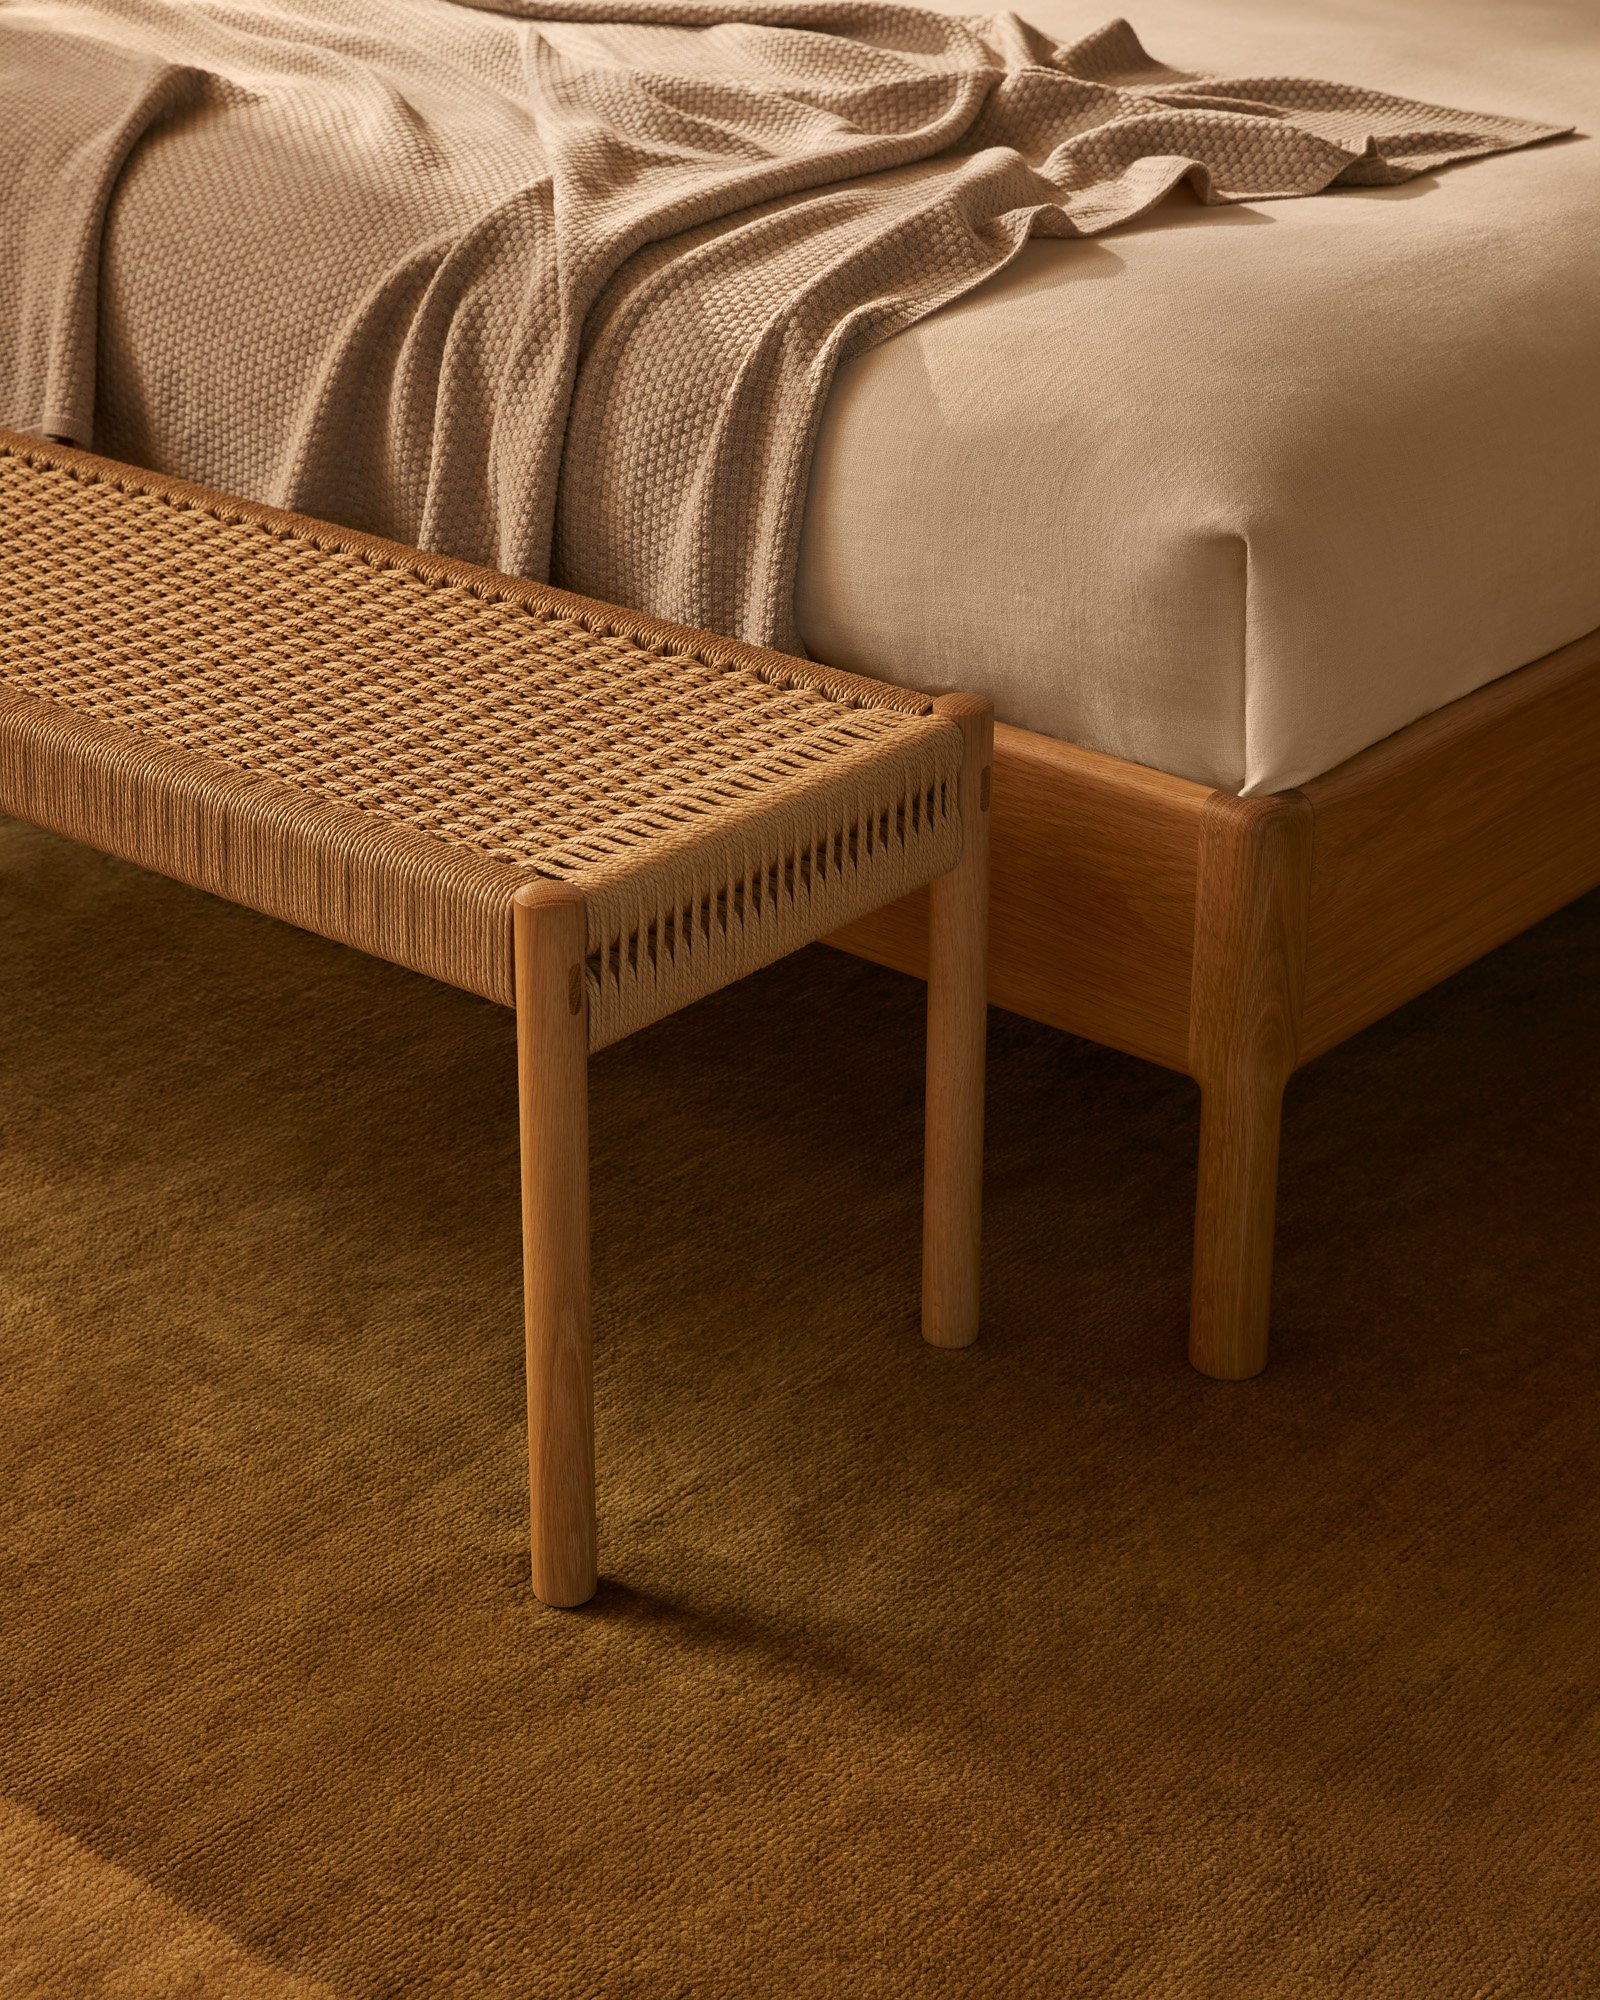 WOVEN BENCH : SIMPLE BED DETAIL.jpg